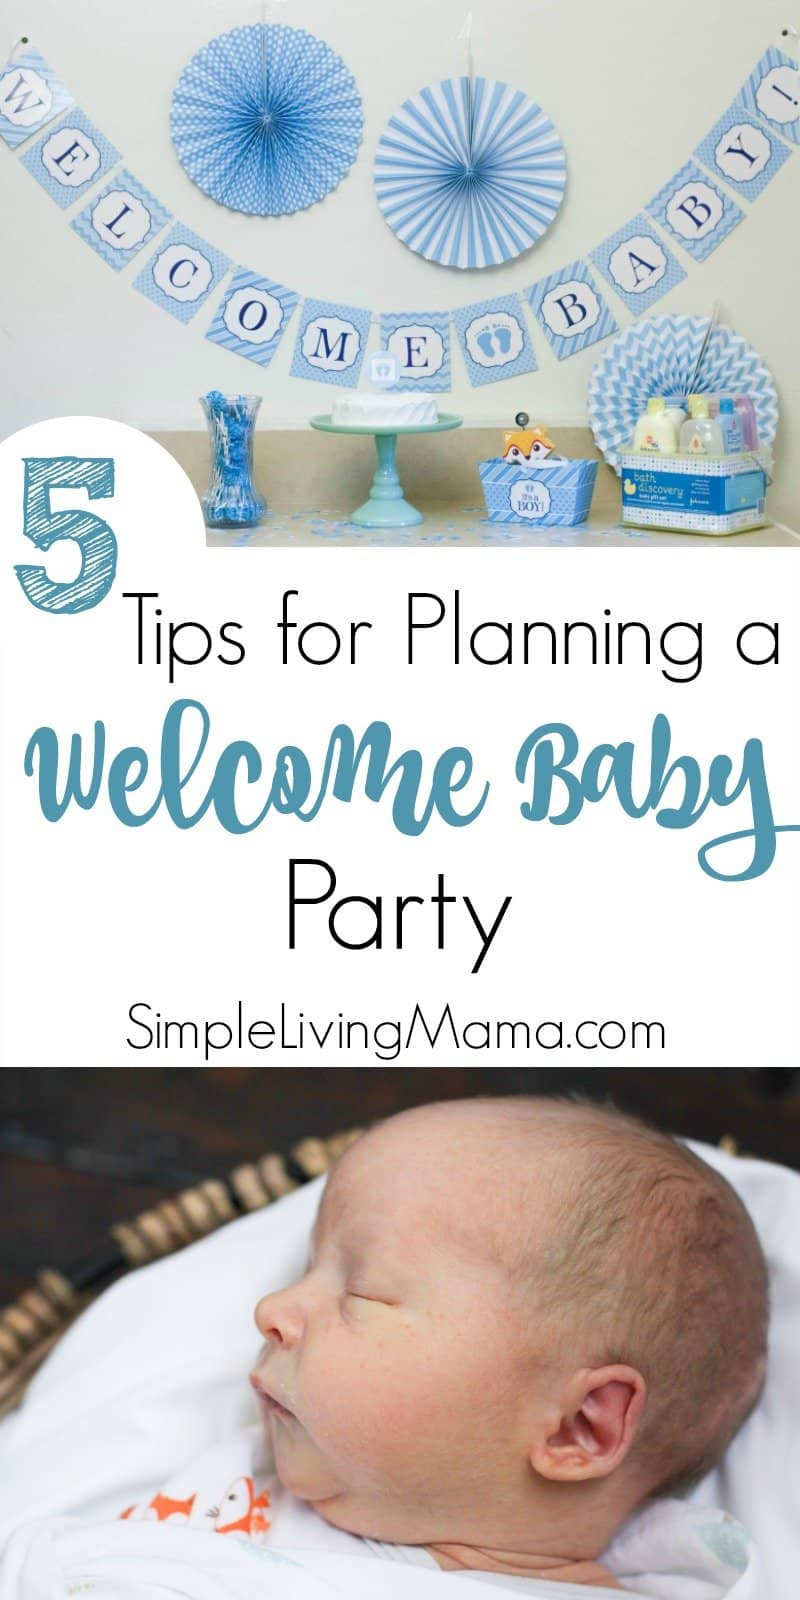 Welcoming Party For Baby
 5 Tips for Planning a Wel e Baby Party Simple Living Mama